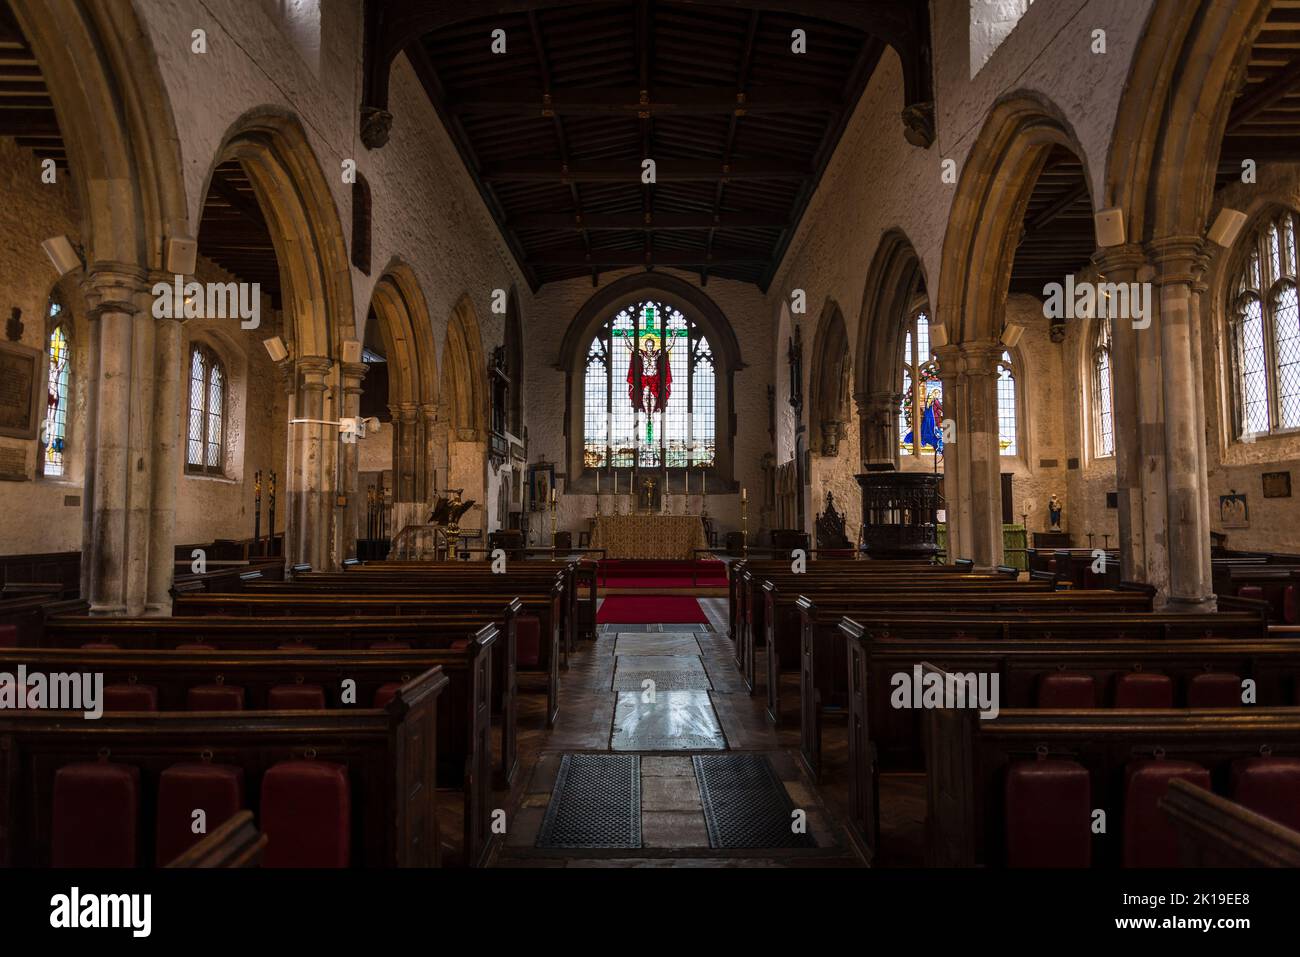 St Dunstan & All Saints Church, an Anglican Church which stands on a site that has been used for Christian worship for over a thousand years, Stepney, Tower Hamlets, London, UK Stock Photo